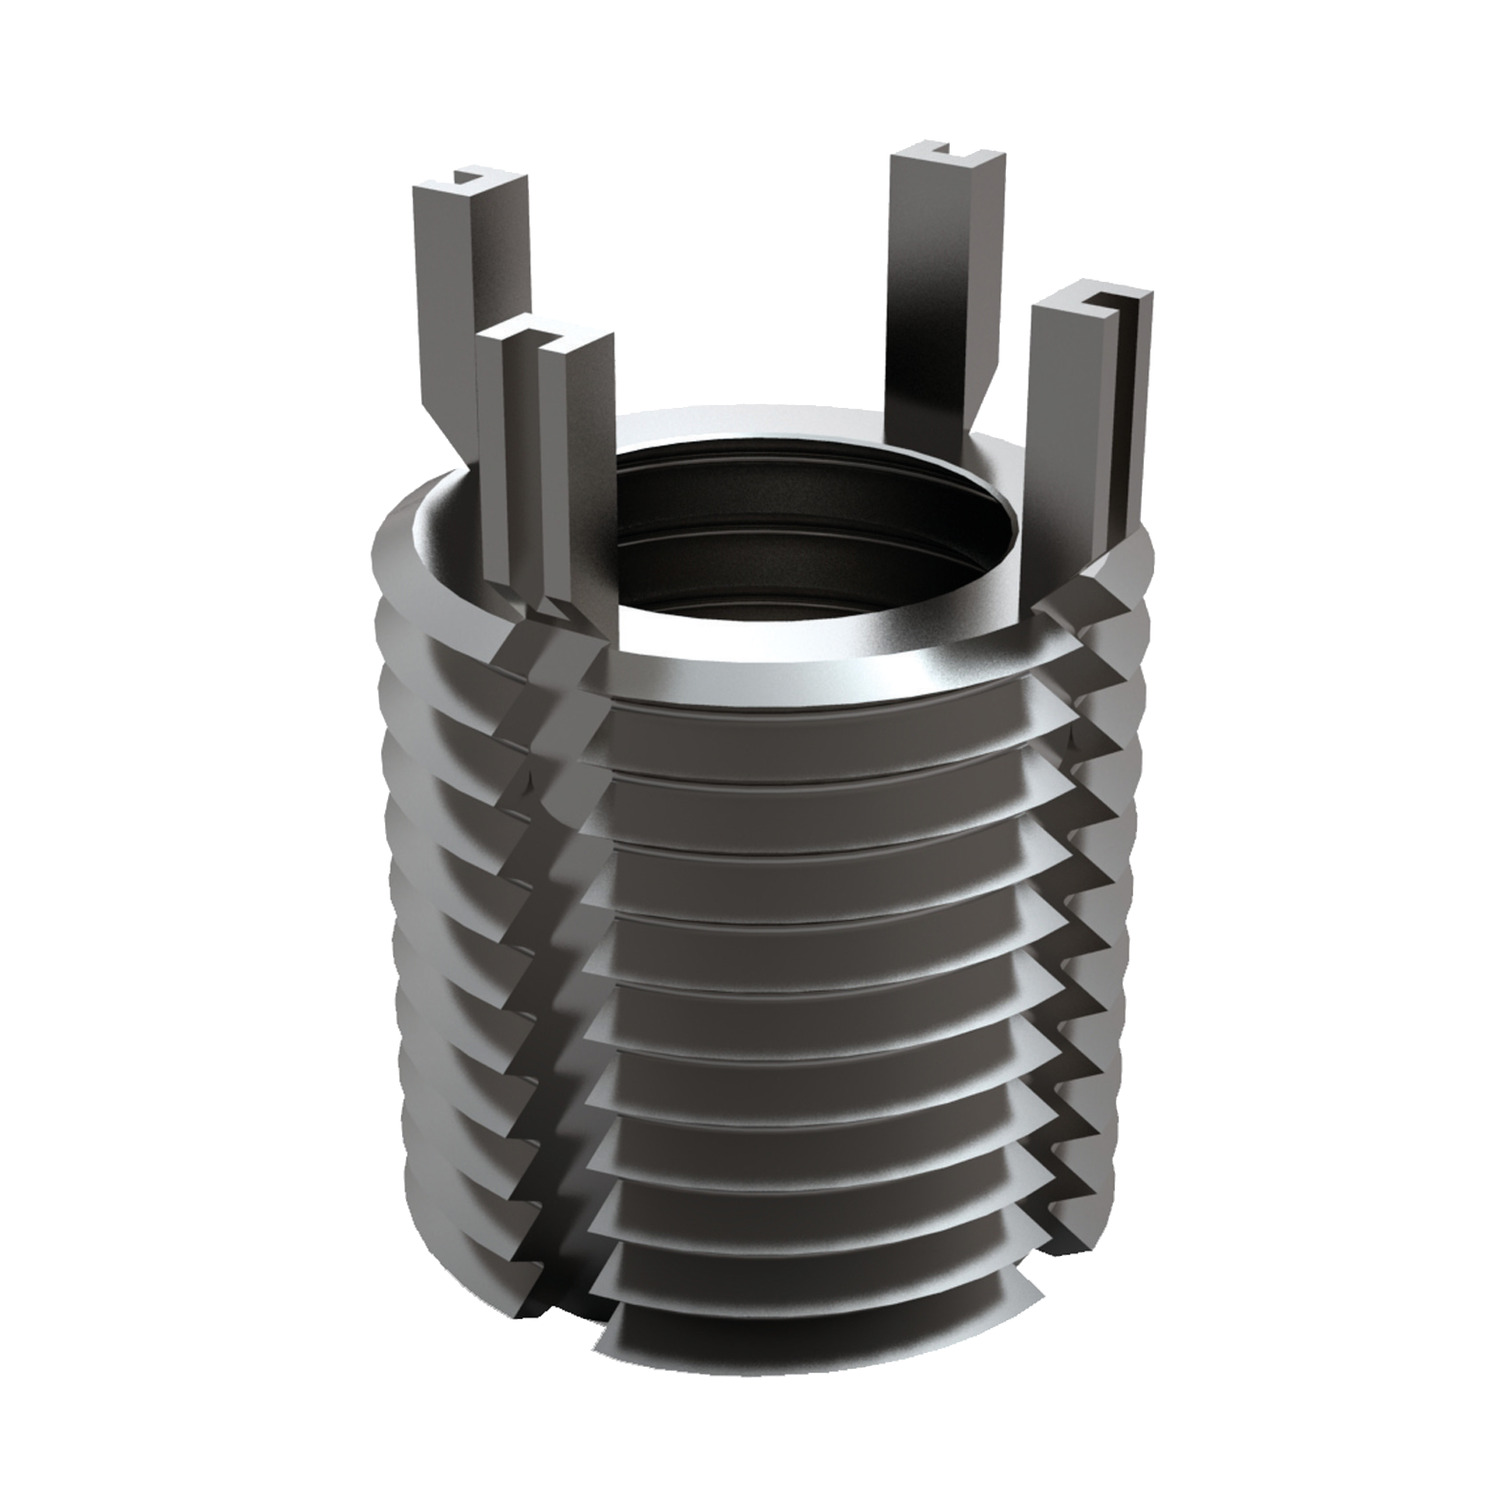 Threaded Insert - Inch These extra heavy duty thread inserts feature increased wall thickness and greater external thread area for maximum durability. Imperial threads, stainless steel.